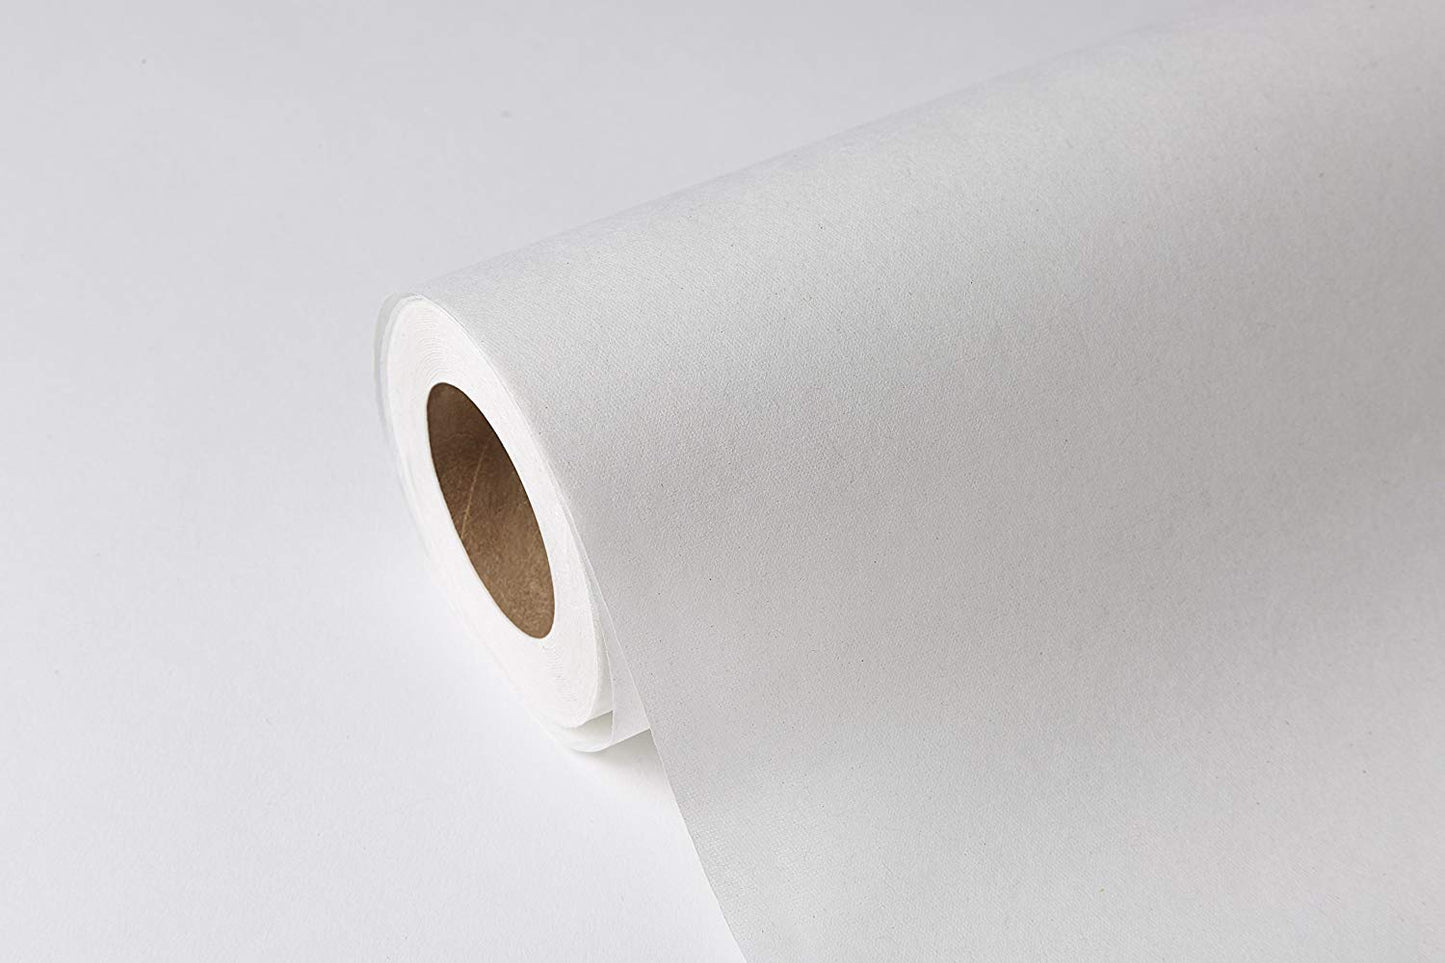 Crepe Exam Table Paper, Latex Free, 18"x125' (12 Pack) - SpaSupply